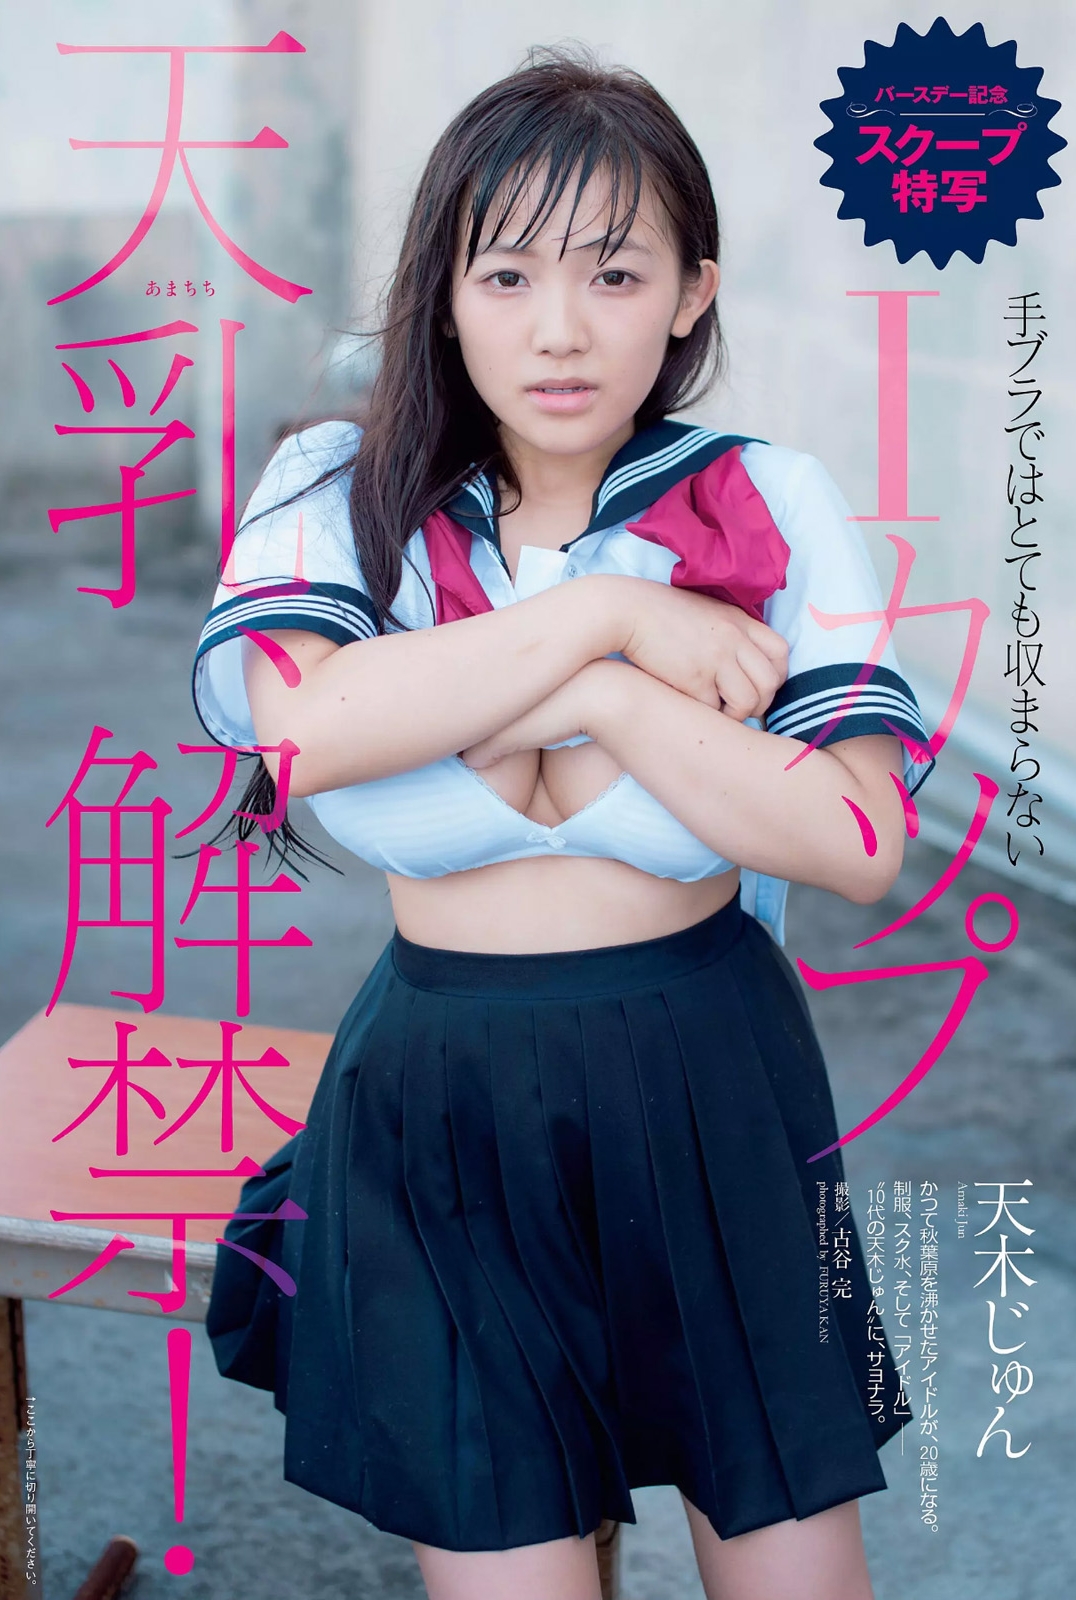 Jun Amaki Plump Cute Lovely Picture and Photo